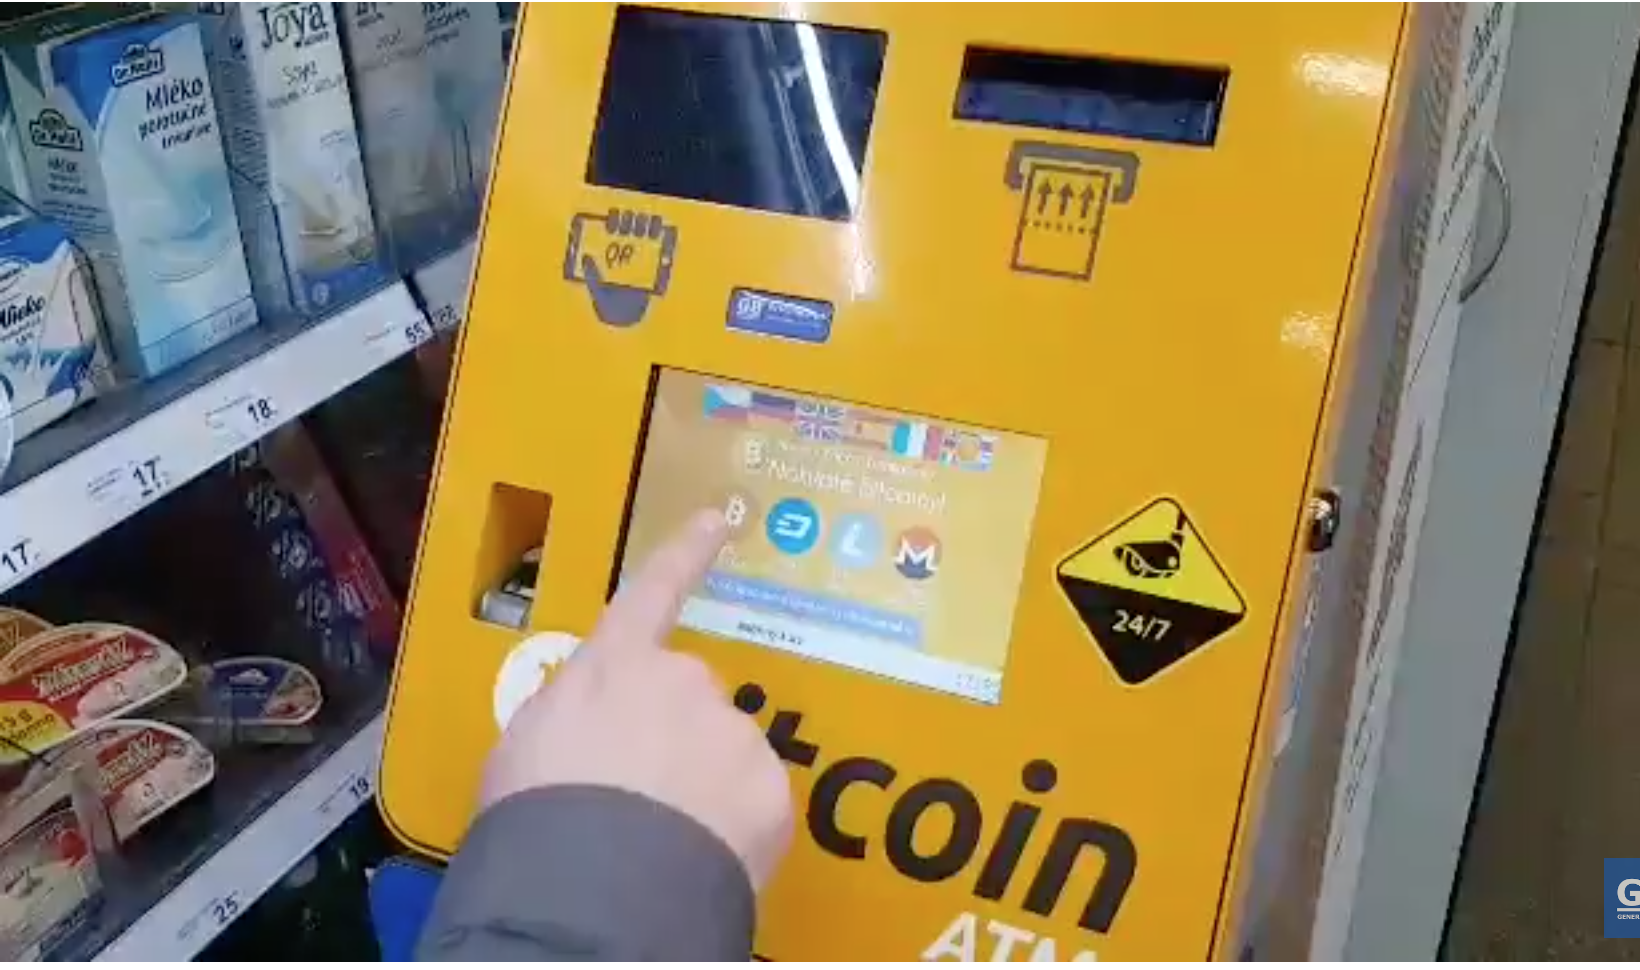 000 counting hundreds bitcoin atms week